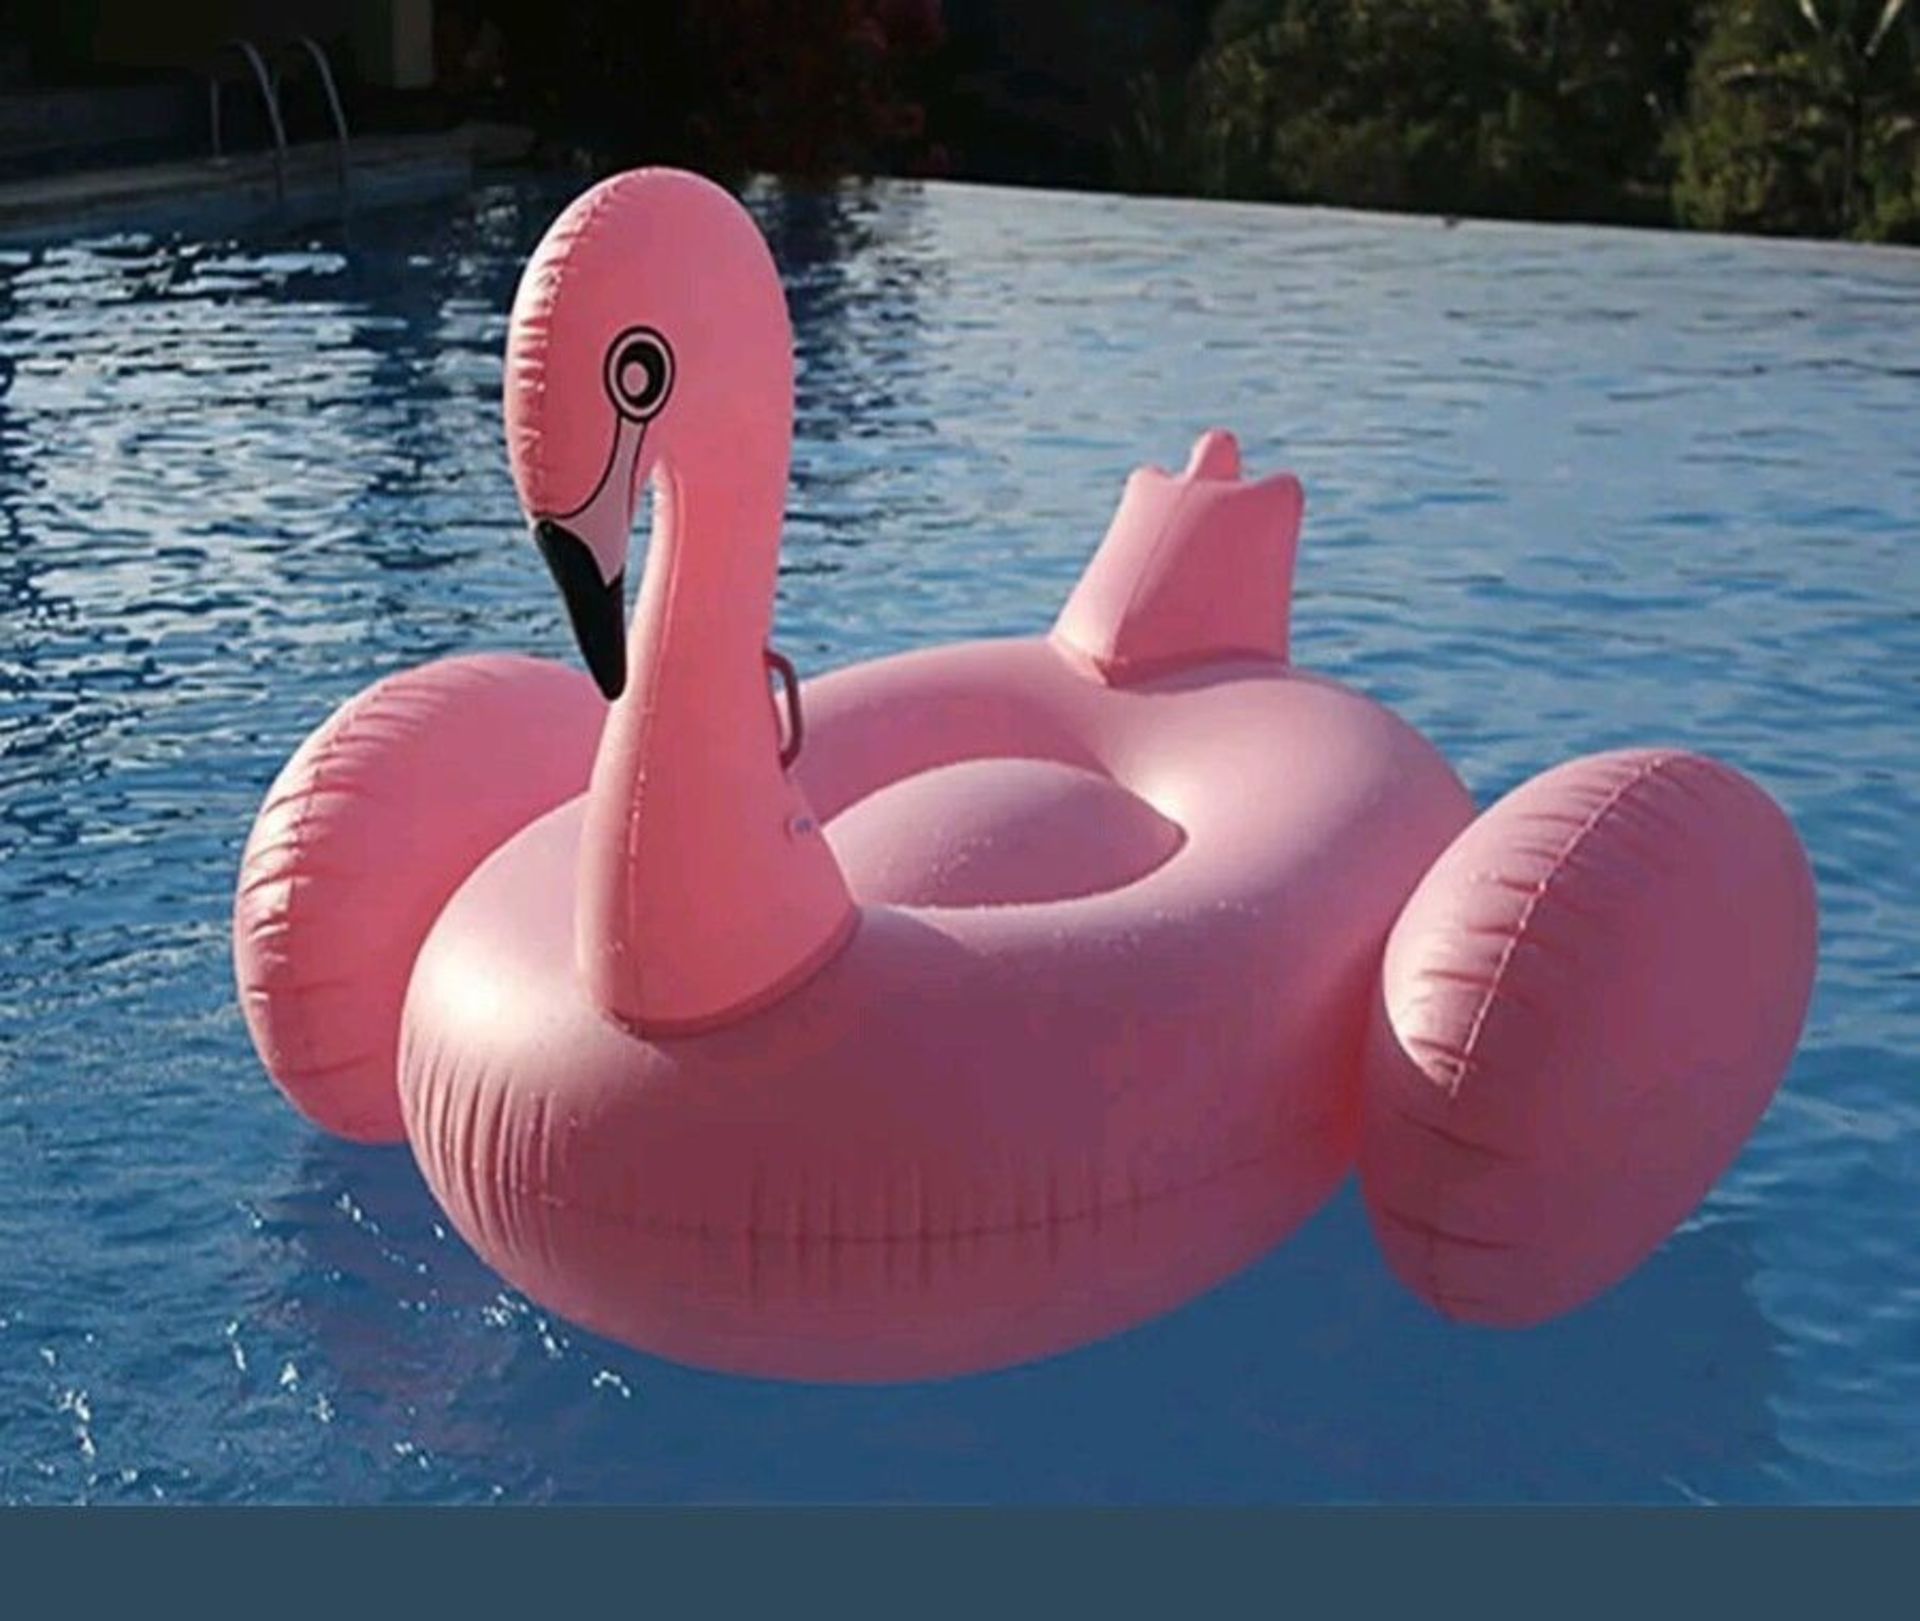 V Brand New Inflatable Flamingo Lounger (150 x 154 x 95cm) - Repair Kit Included - Easy Inflatable - Image 2 of 2